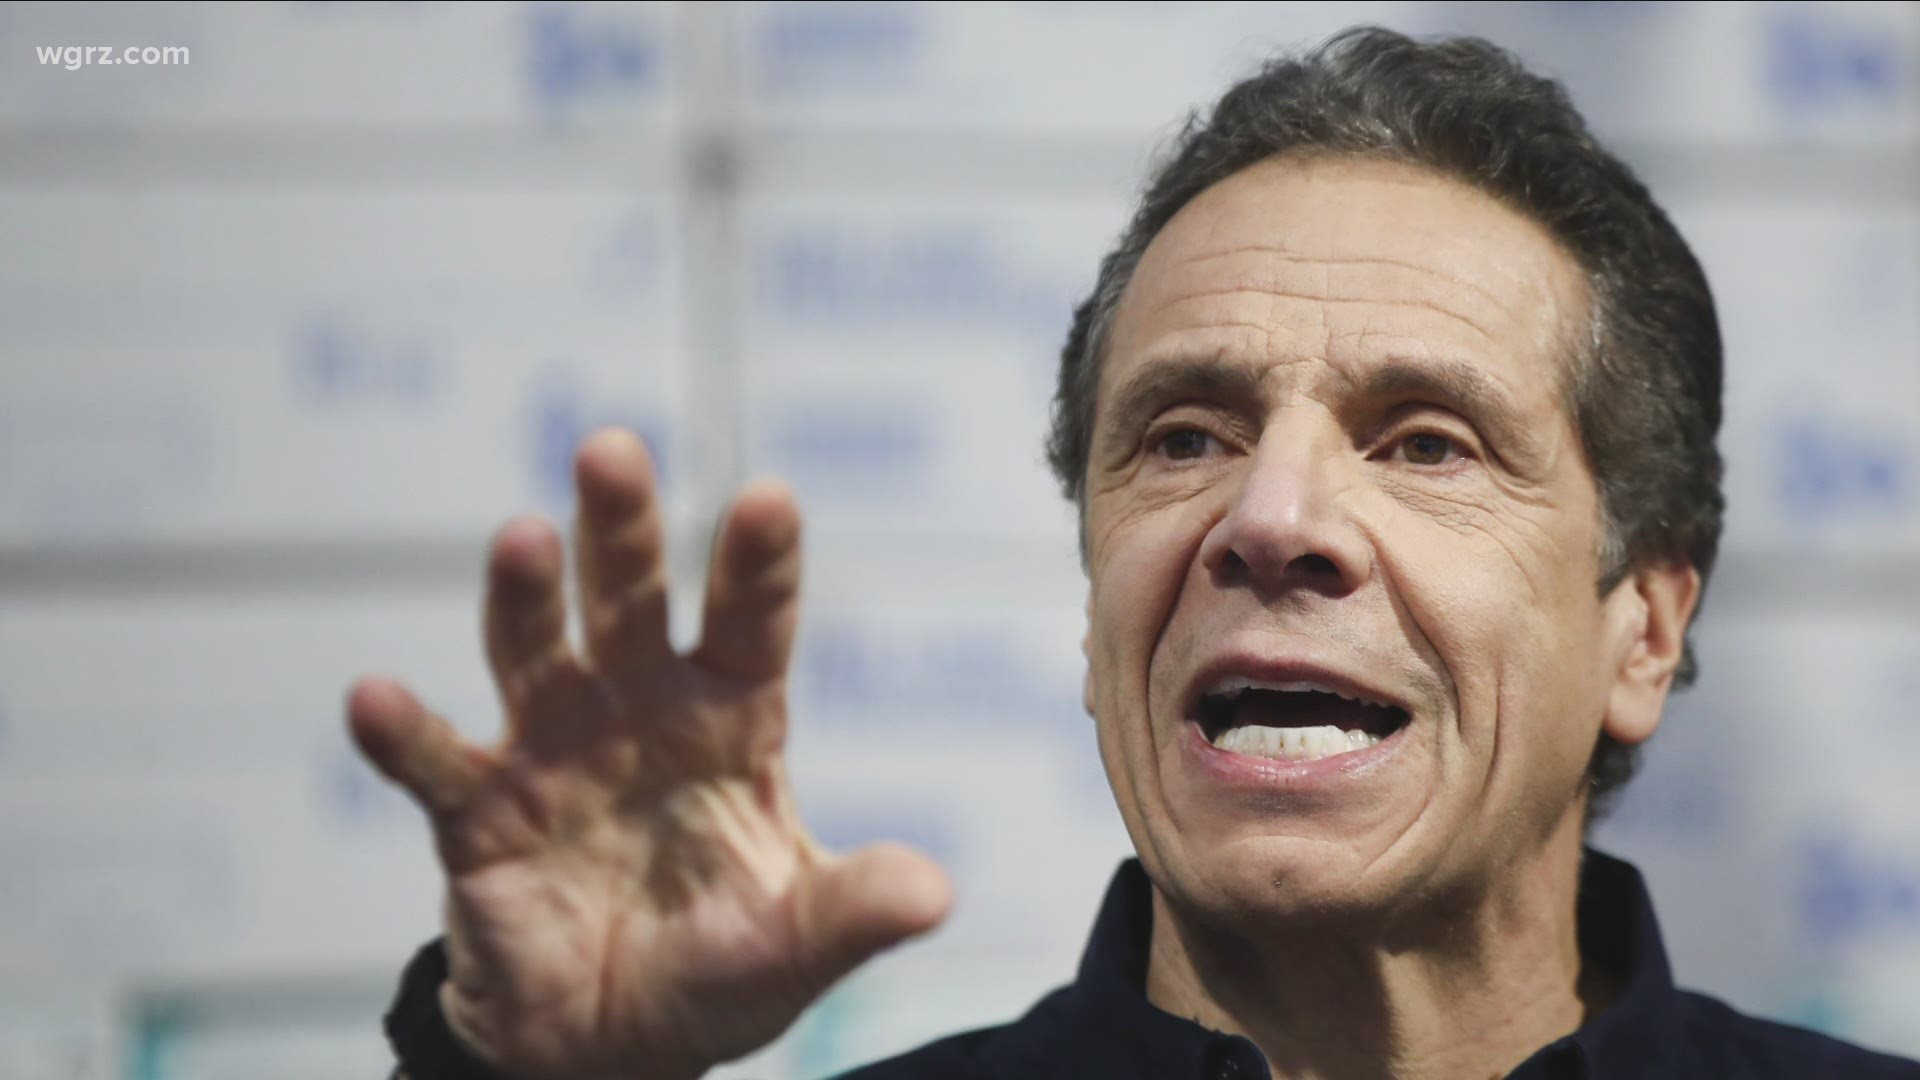 Cuomo's conduct will be investigated by a law firm appointed by the state attorney genera. The state legislature is preparing to vote to revoke his executive powers.